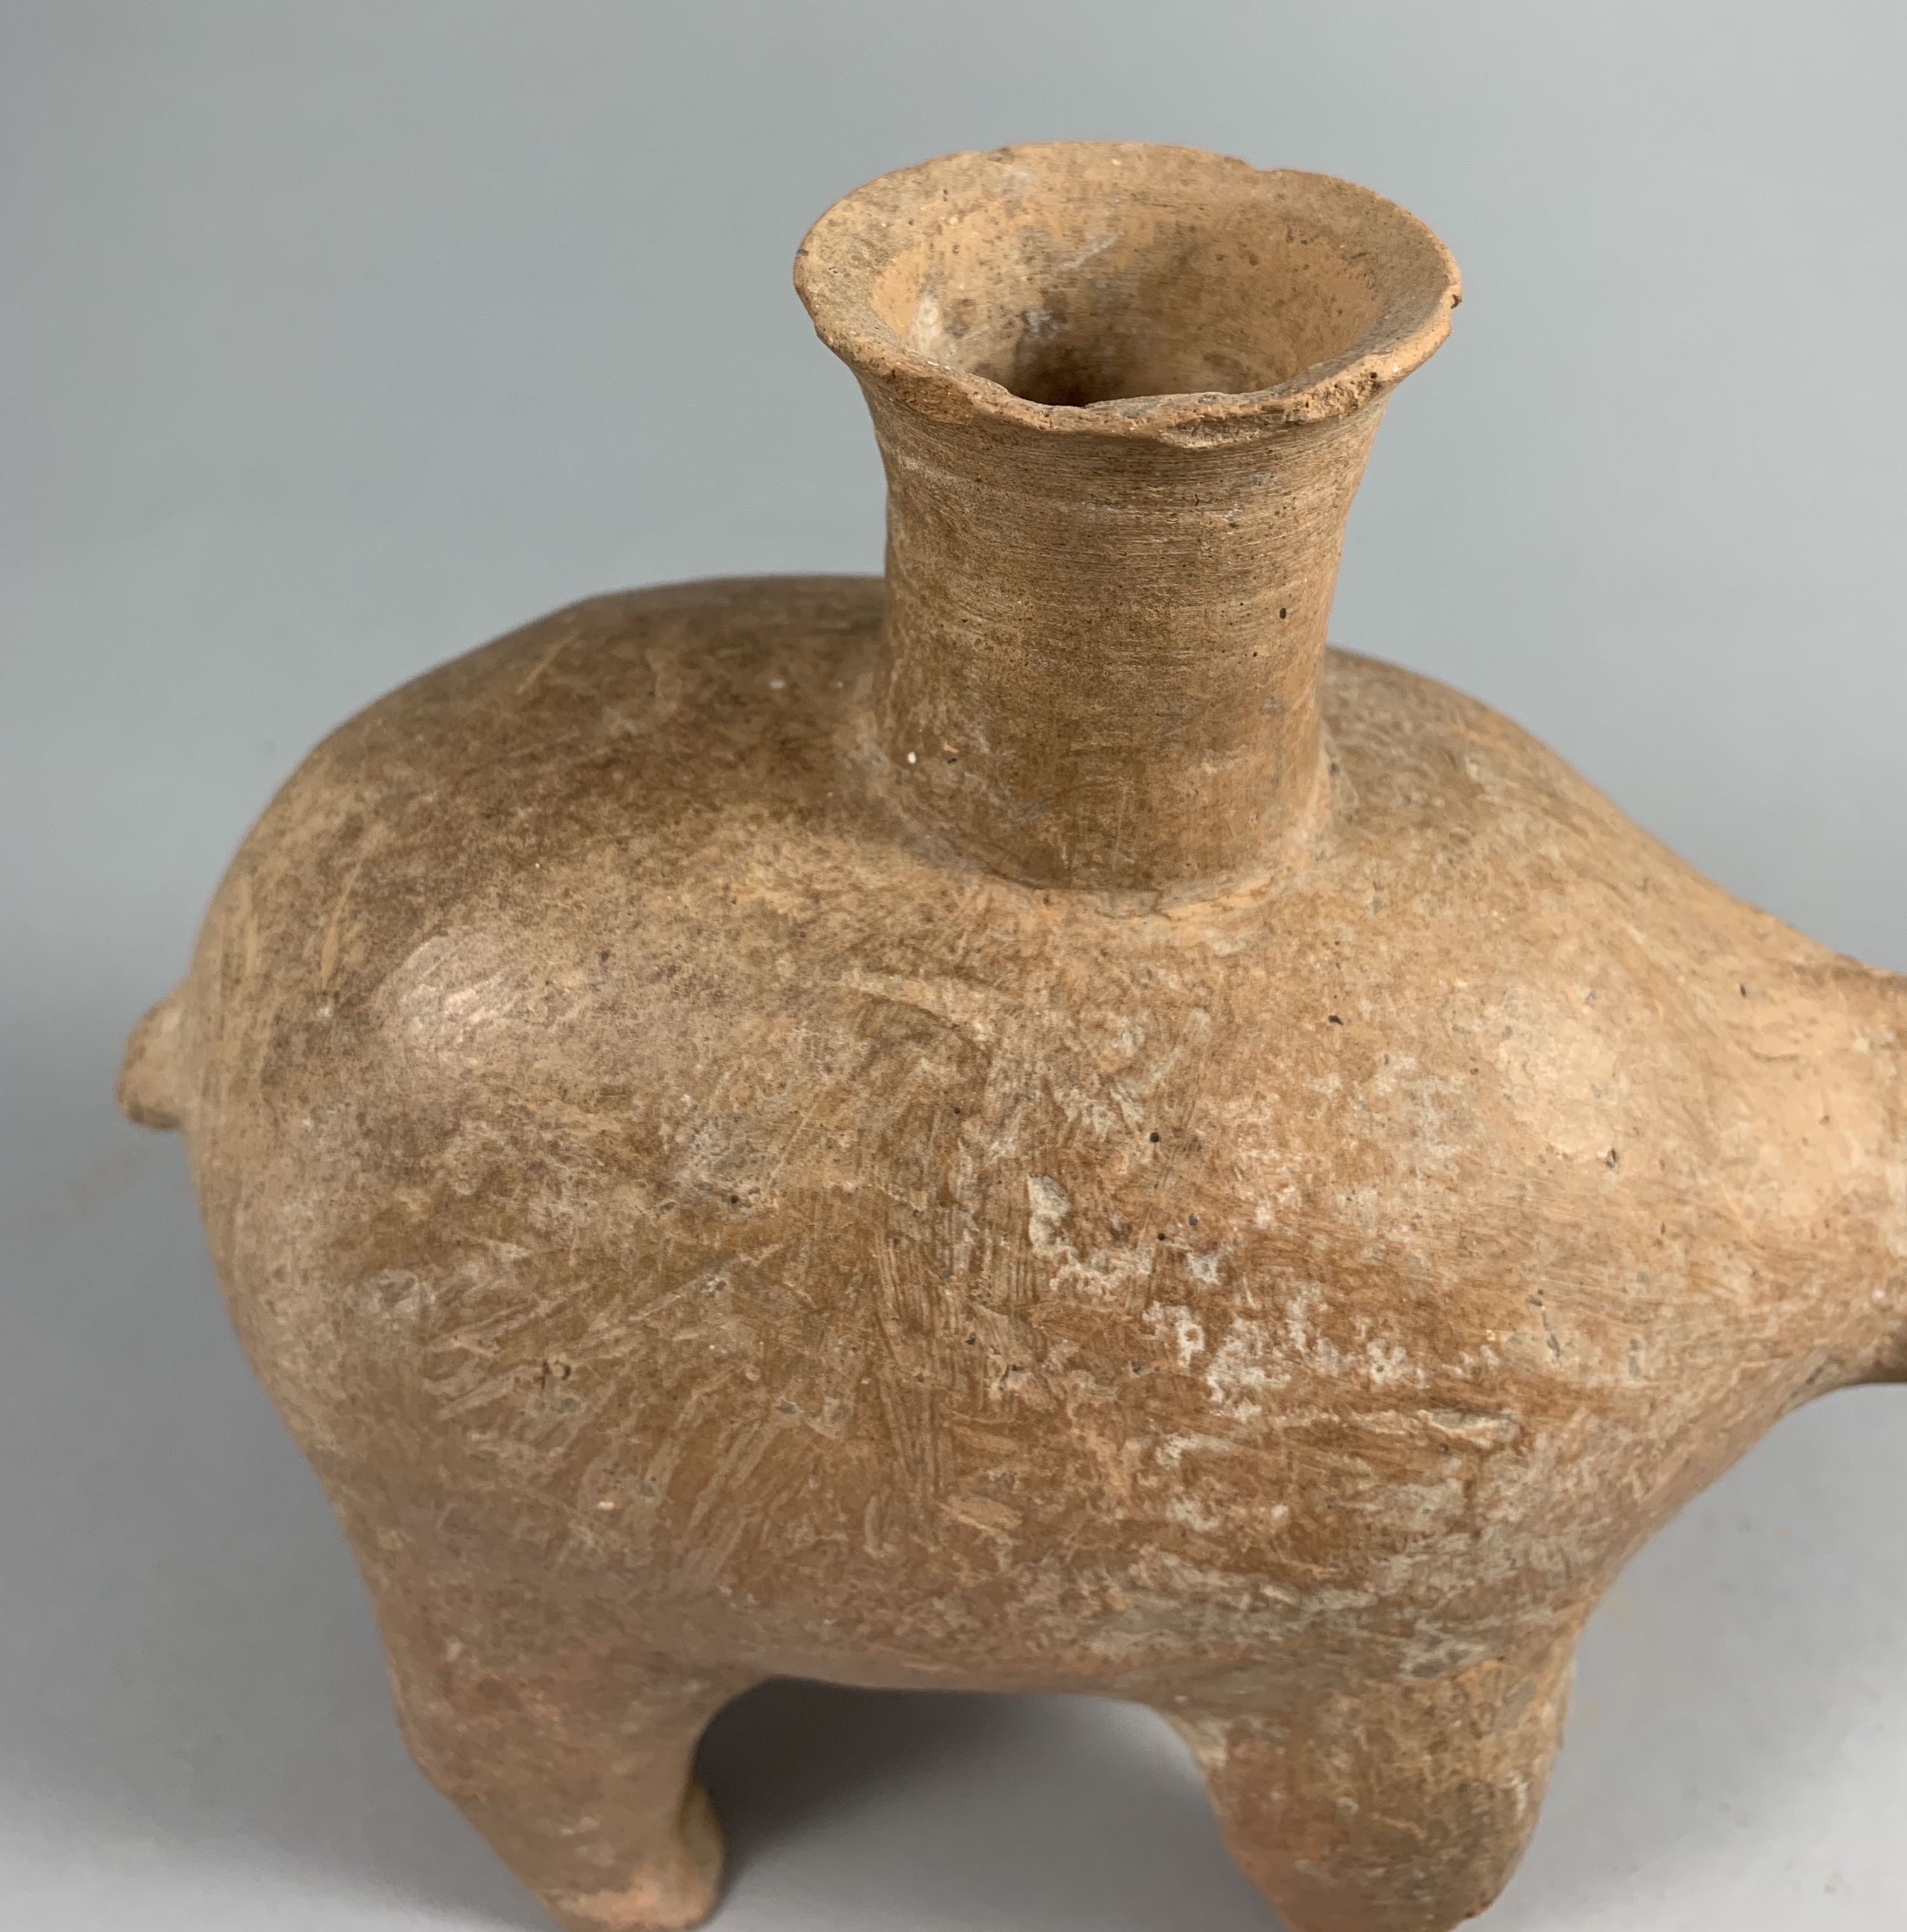 A Red Pottery Jar In The Form Of A Bear, Gansu Province, Qijia Culture (2050-1700 Bc) - Image 11 of 19